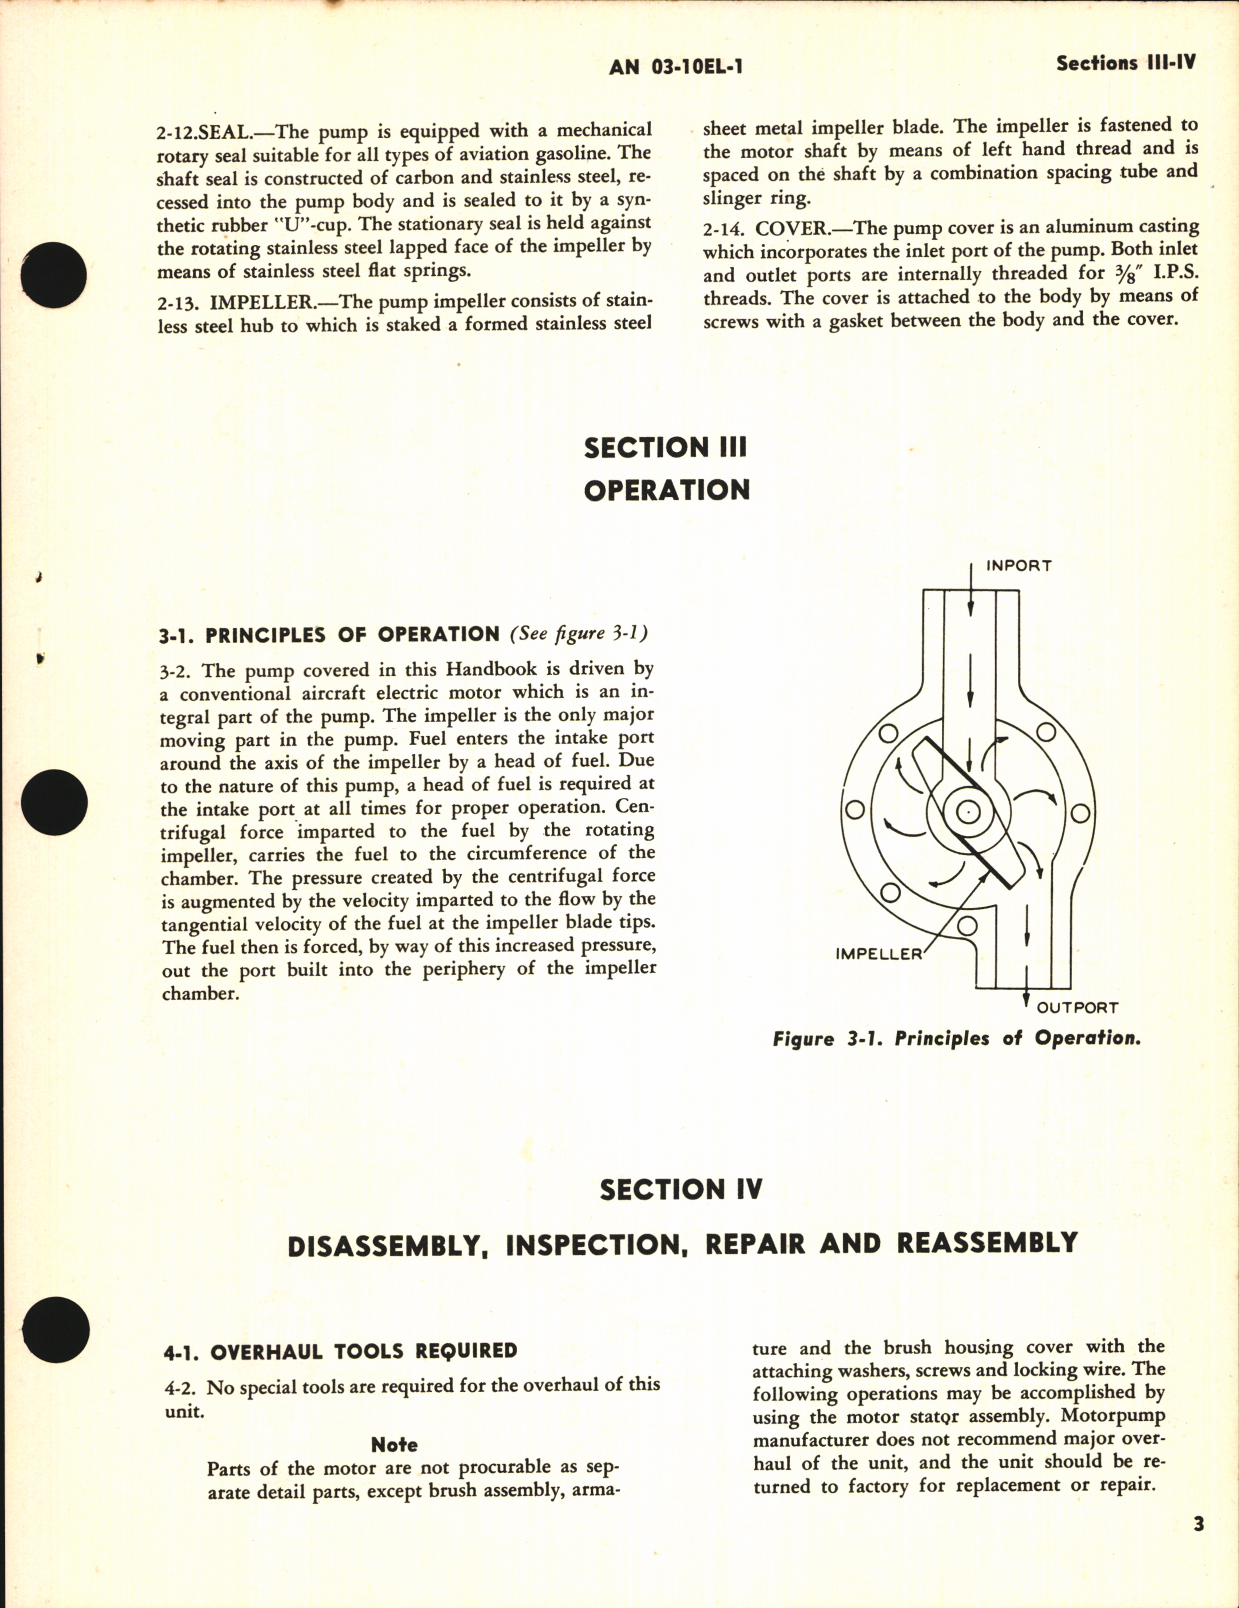 Sample page 7 from AirCorps Library document: Overhaul Instructions for Electric Fuel Pump Model AR3Y